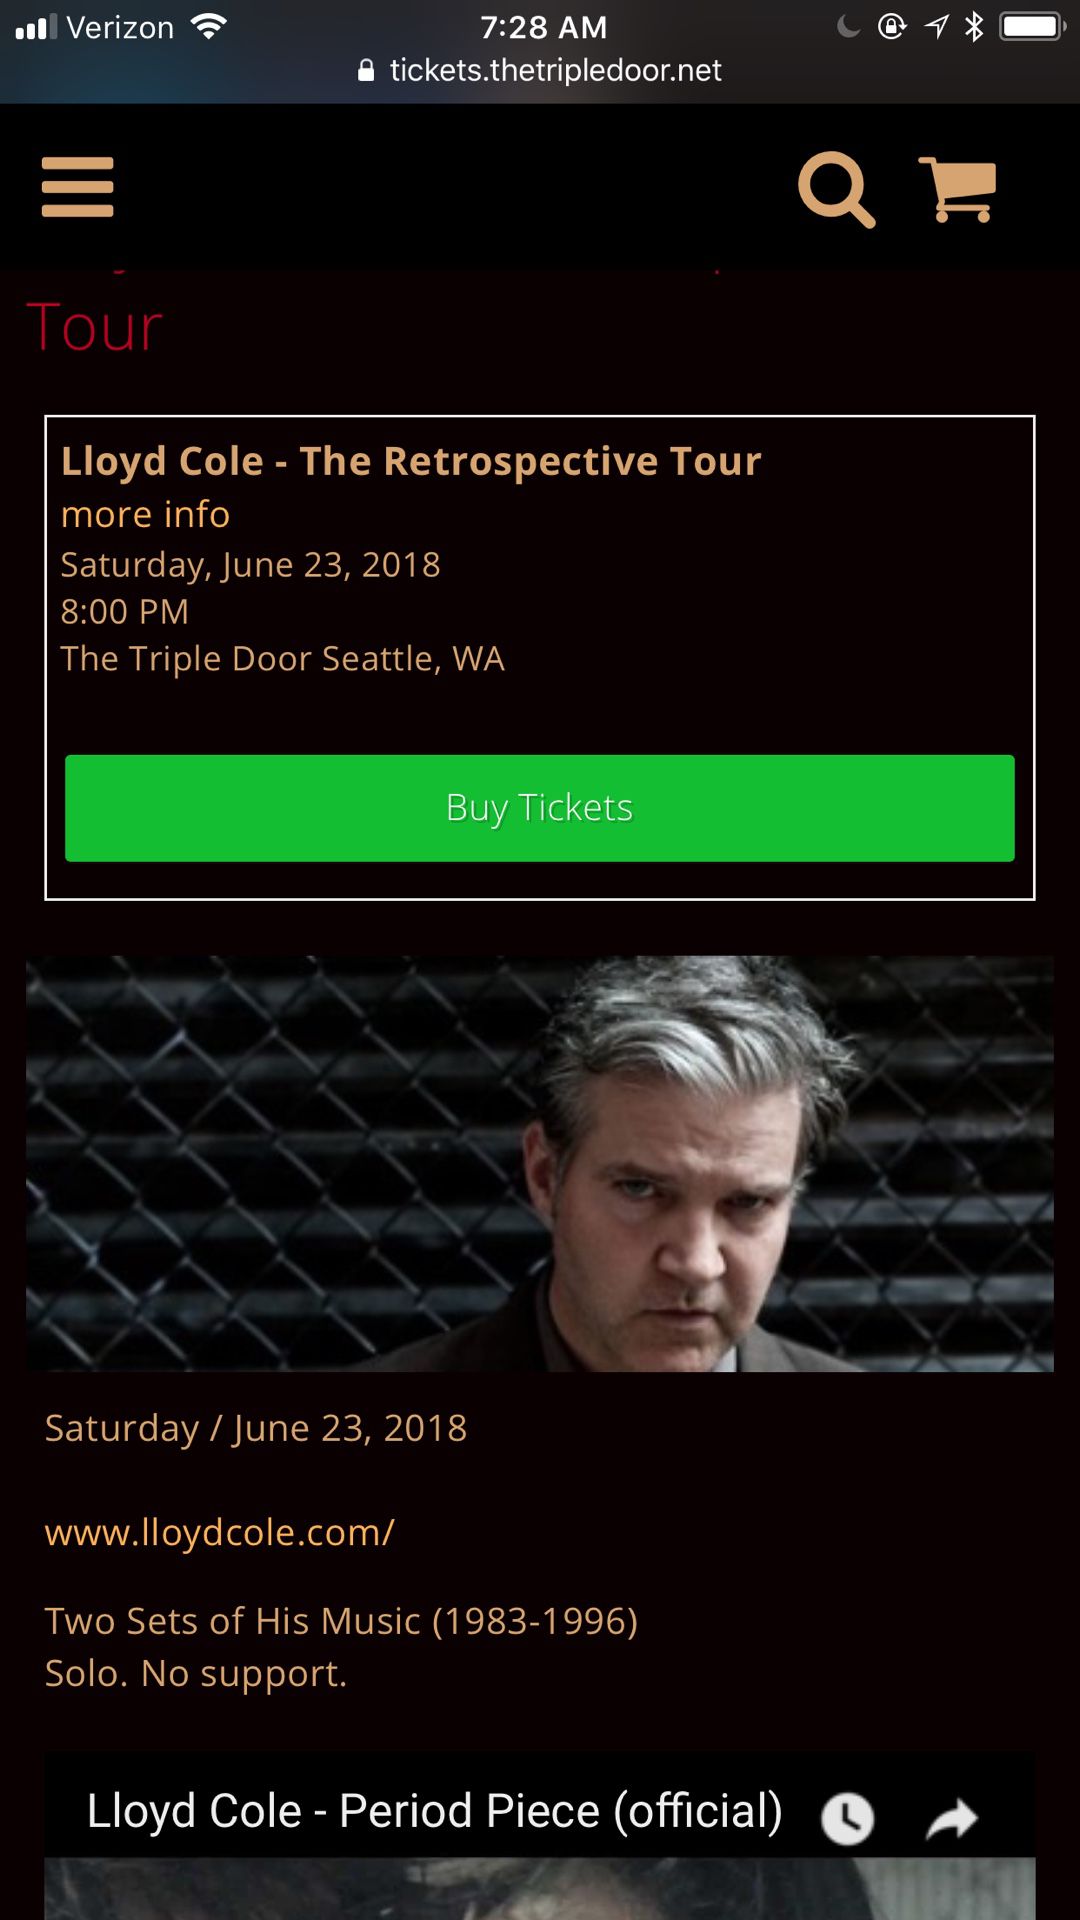 Tickets (2) to Lloyd Cole on 6/23 at the Triple Door